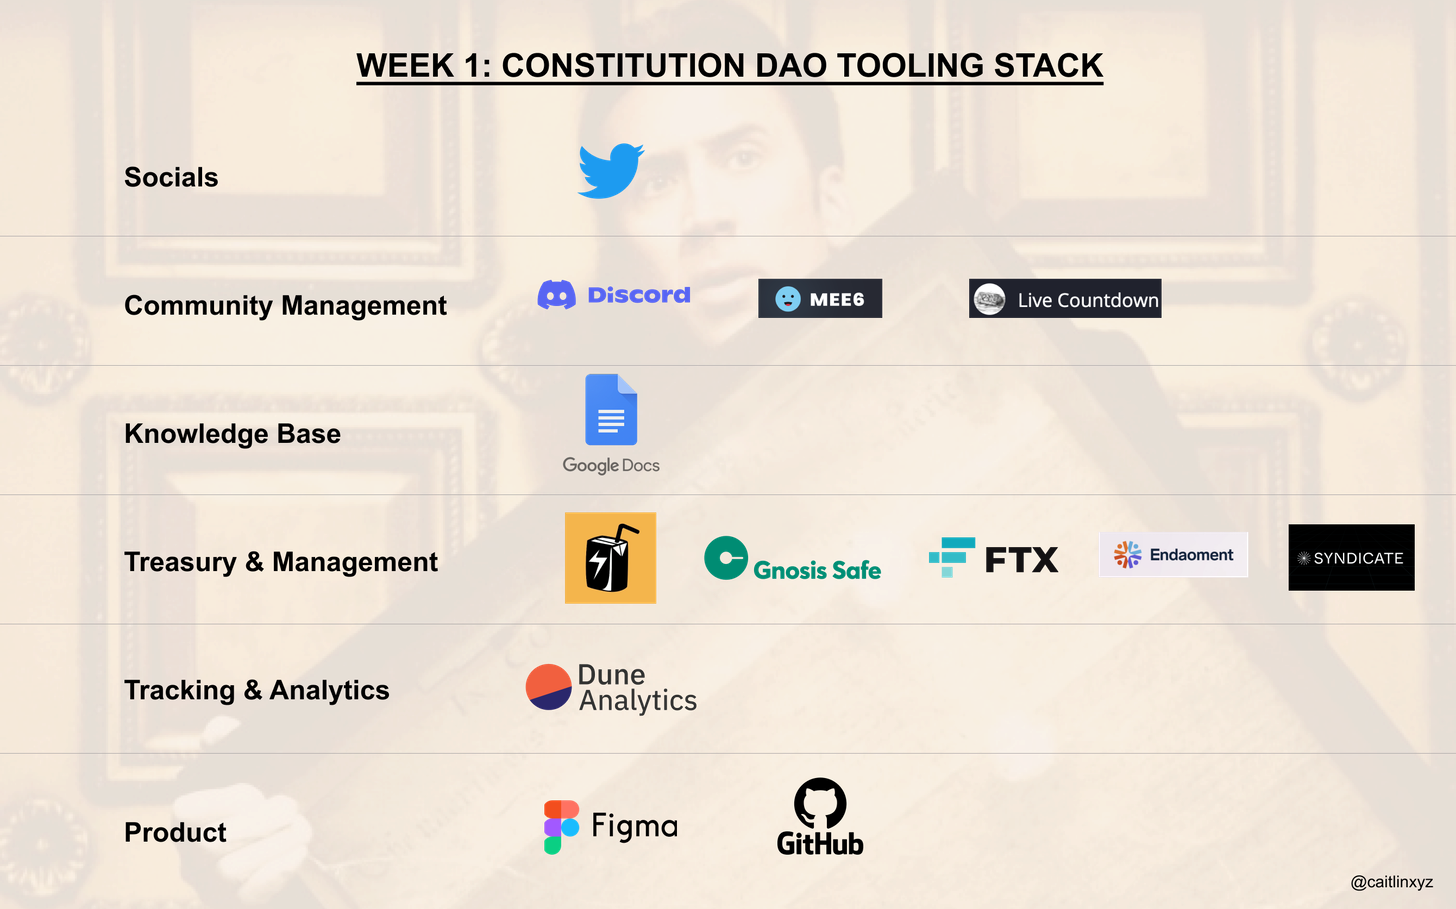 Stack of tools Constitution DAO used in its first week.